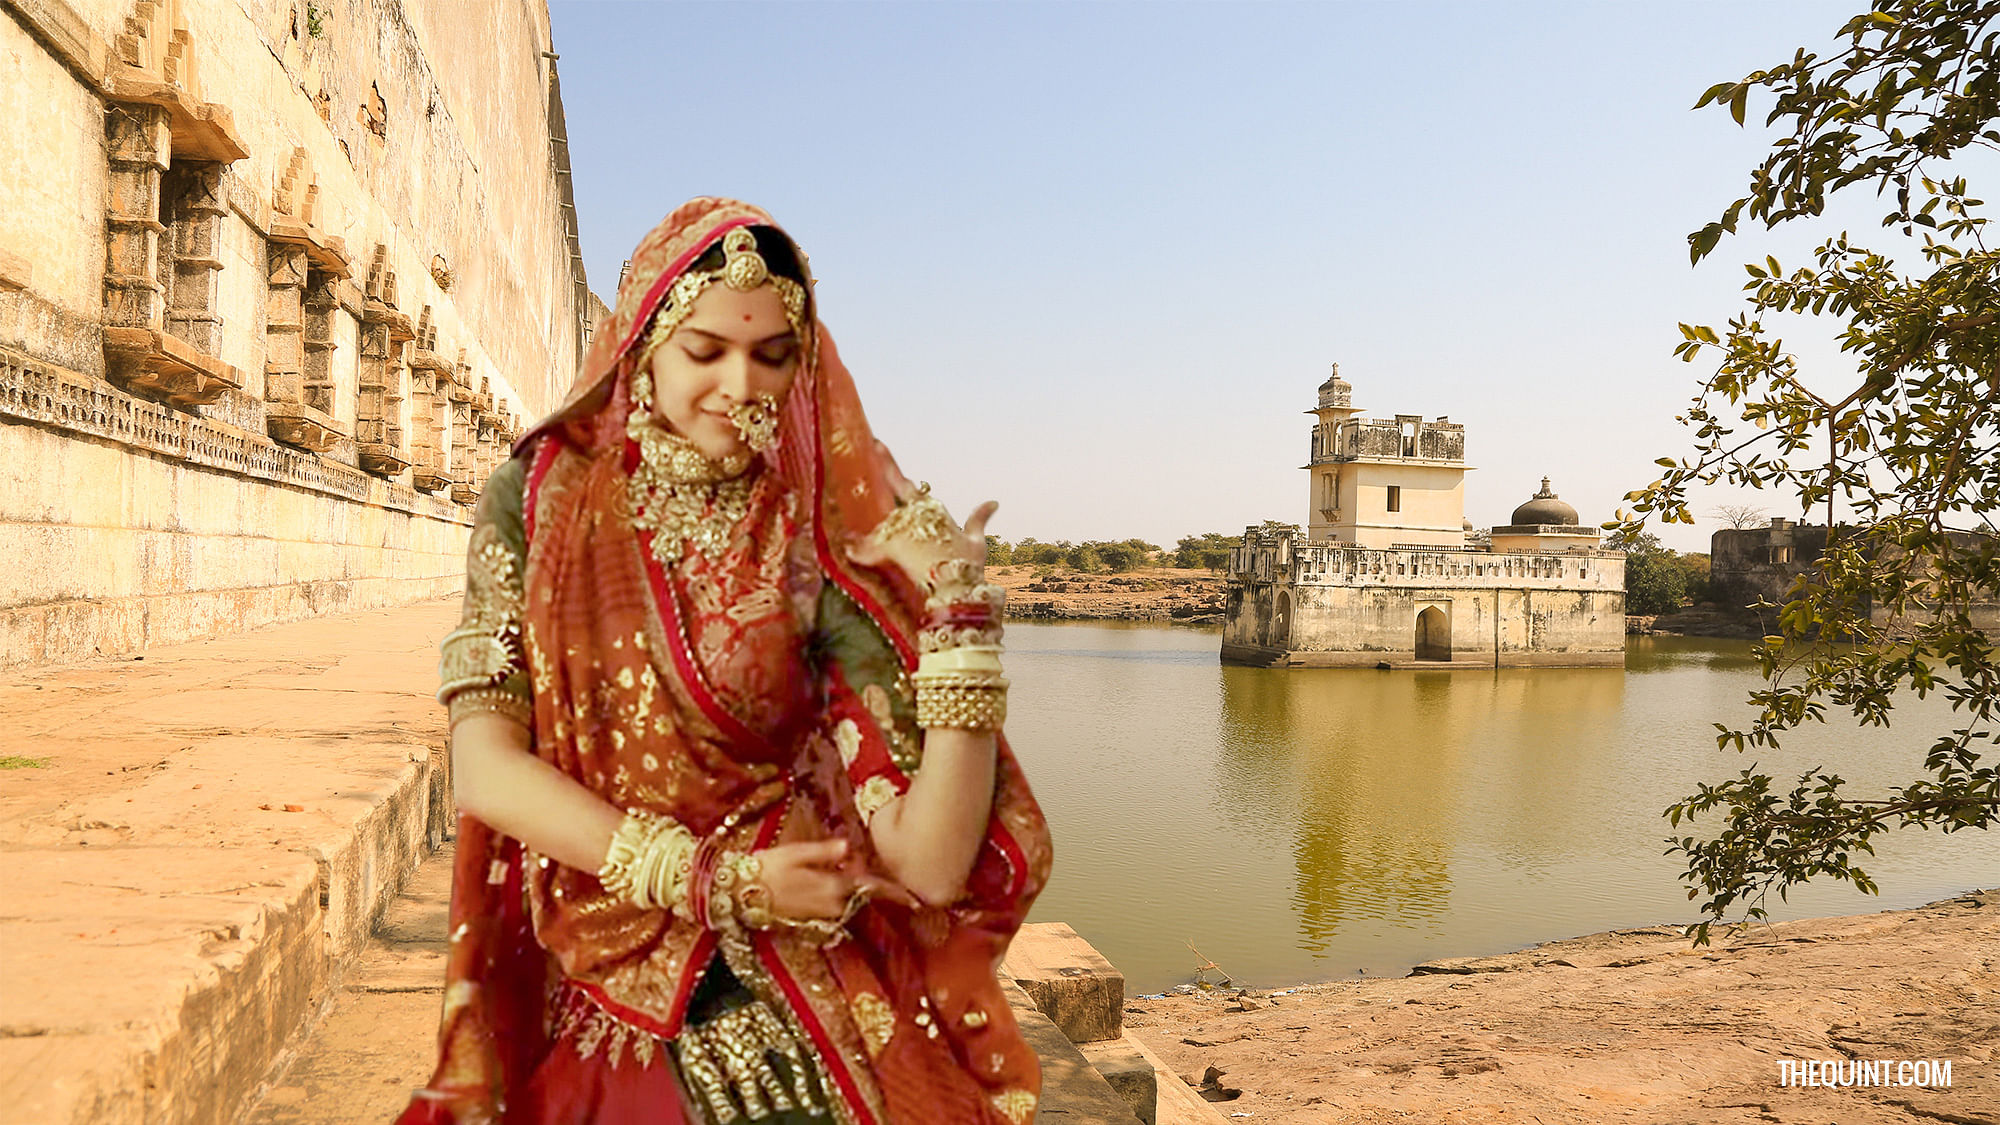 Chittorgarh tour guides have been retelling the legend of Rani Padmini for ages now. What is their take?&nbsp;